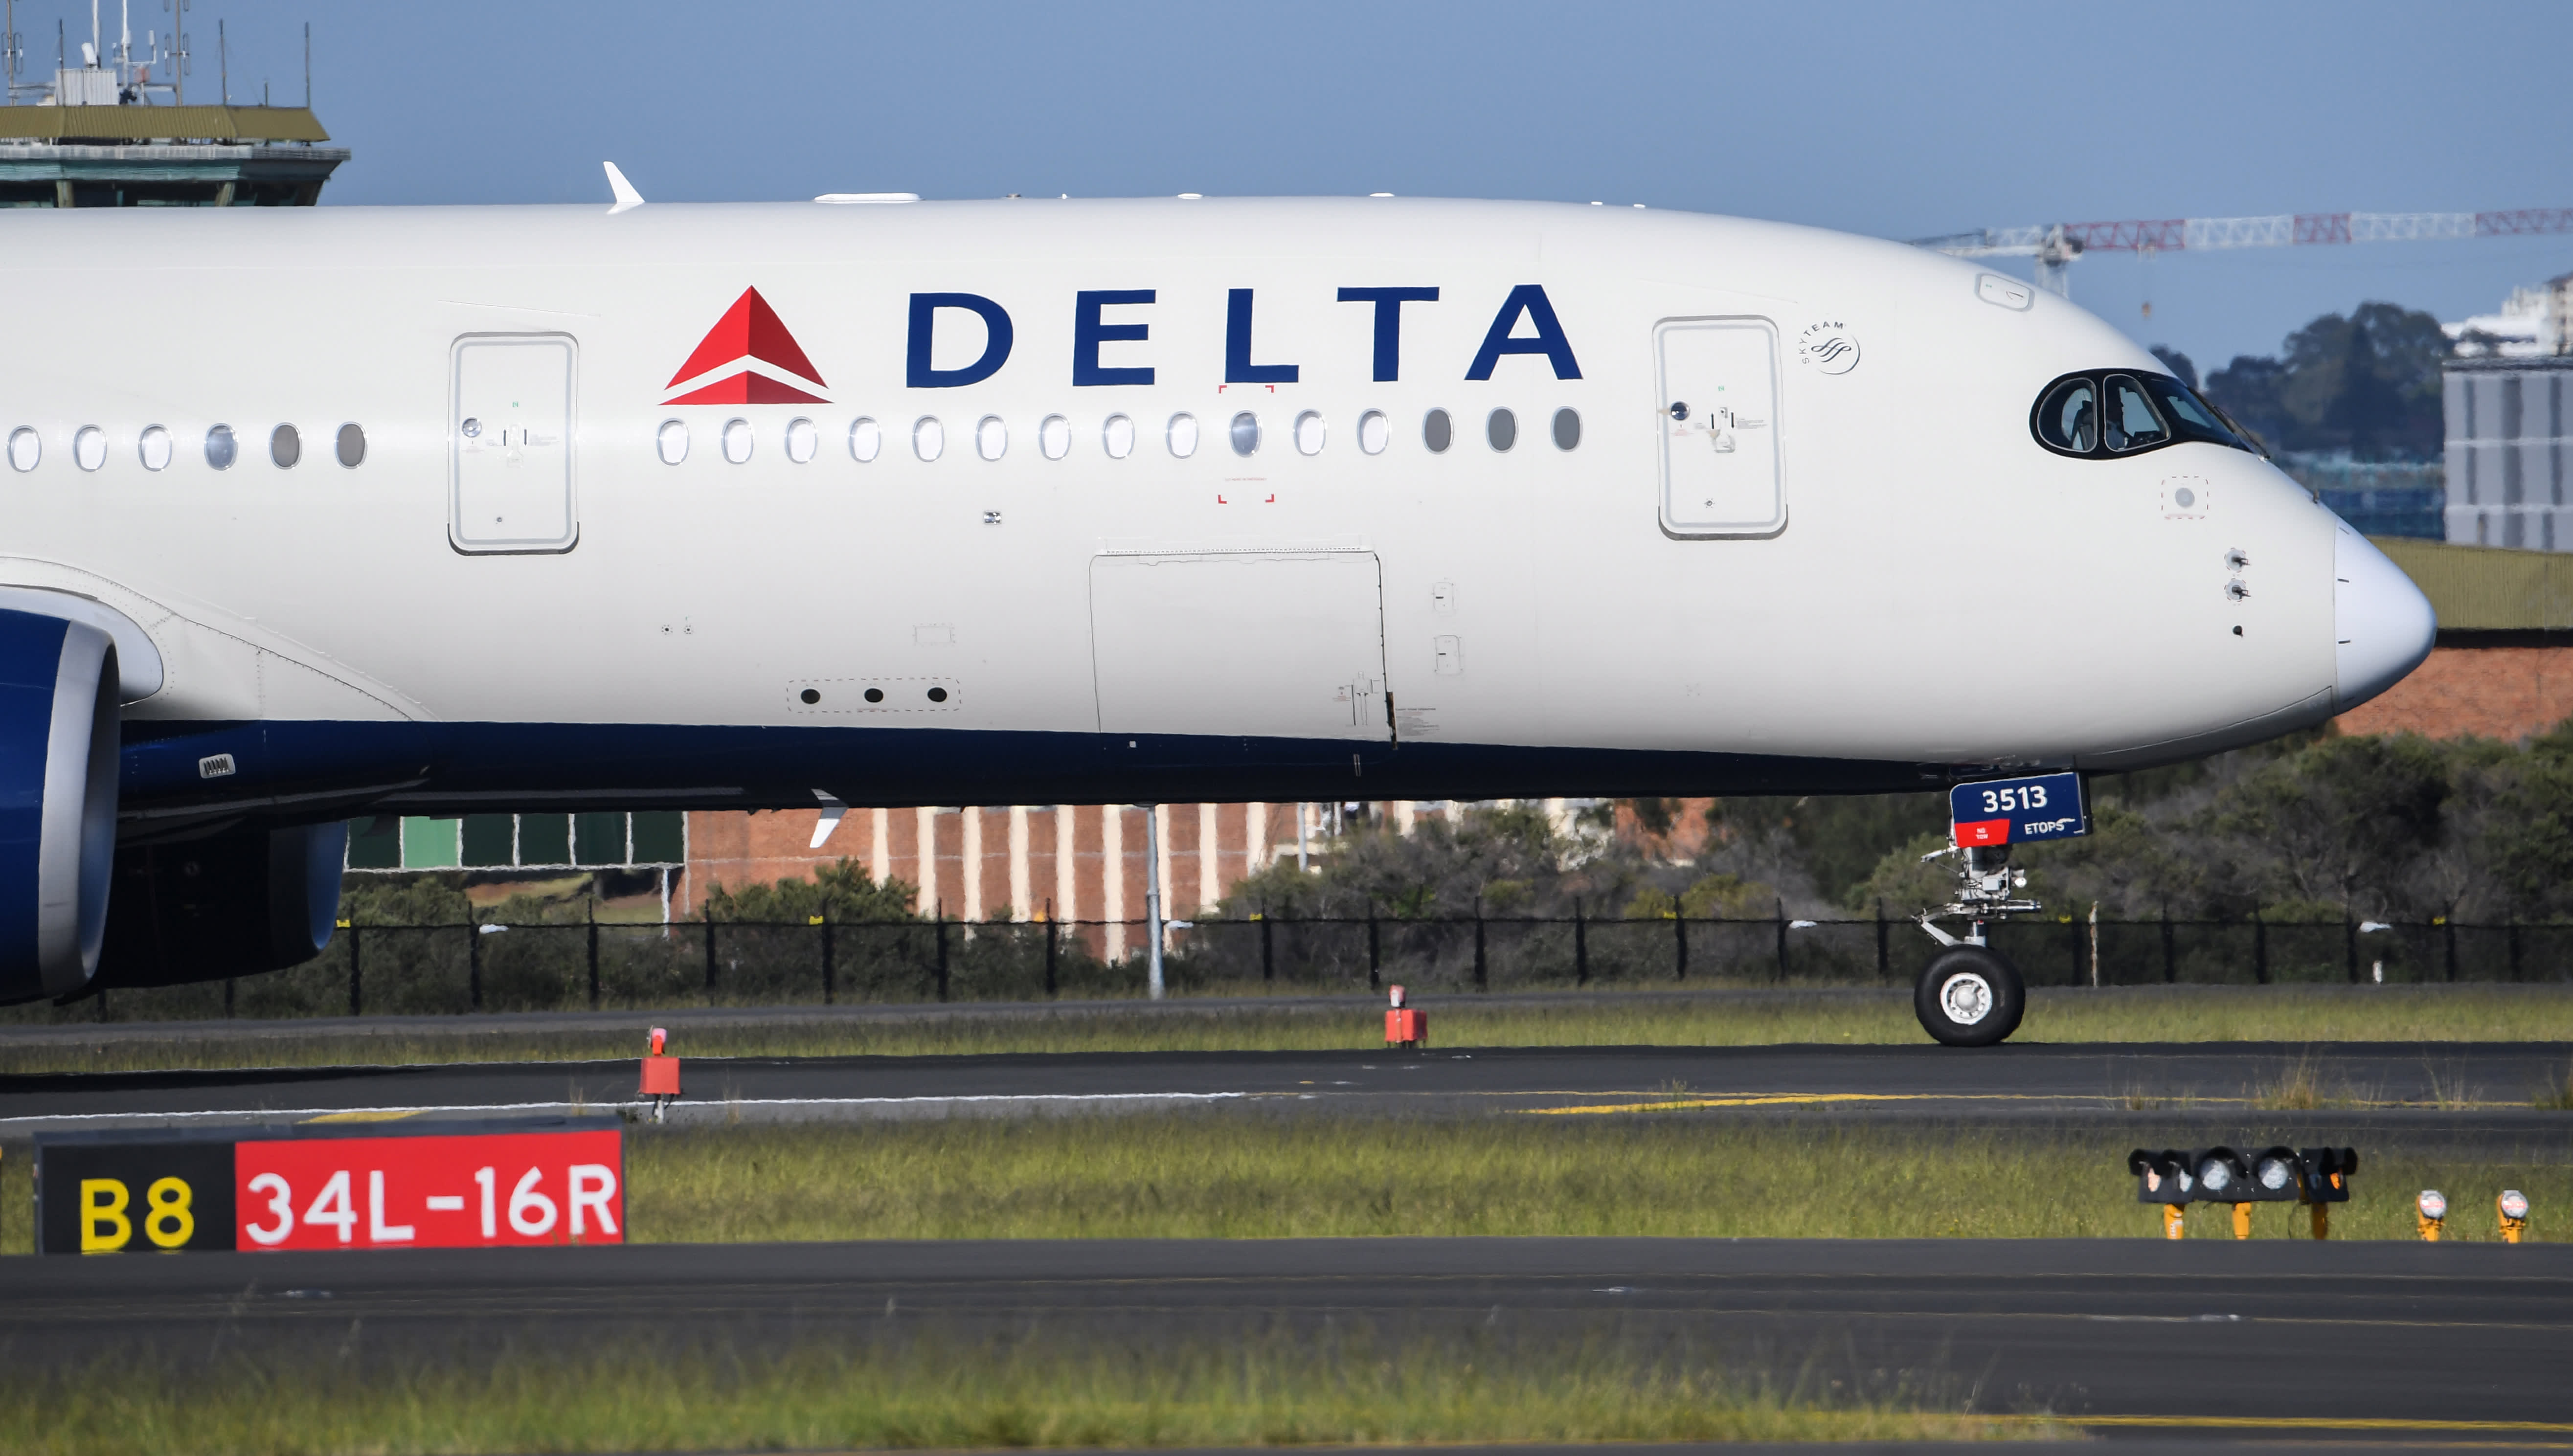 Stocks making the biggest moves before the bell: Delta, Moderna, Zoom Video, Microsoft & more